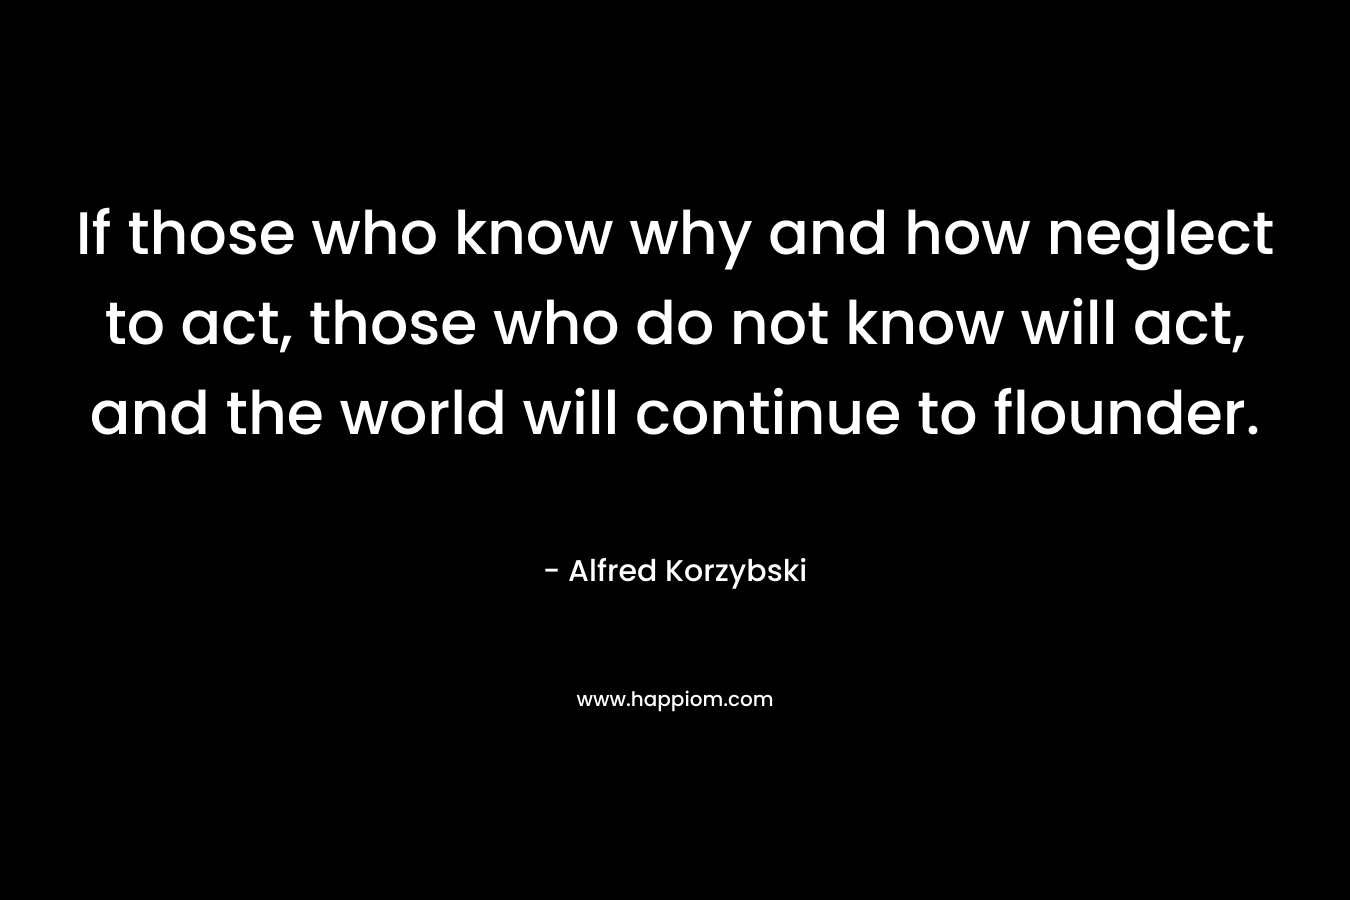 If those who know why and how neglect to act, those who do not know will act, and the world will continue to flounder. – Alfred Korzybski